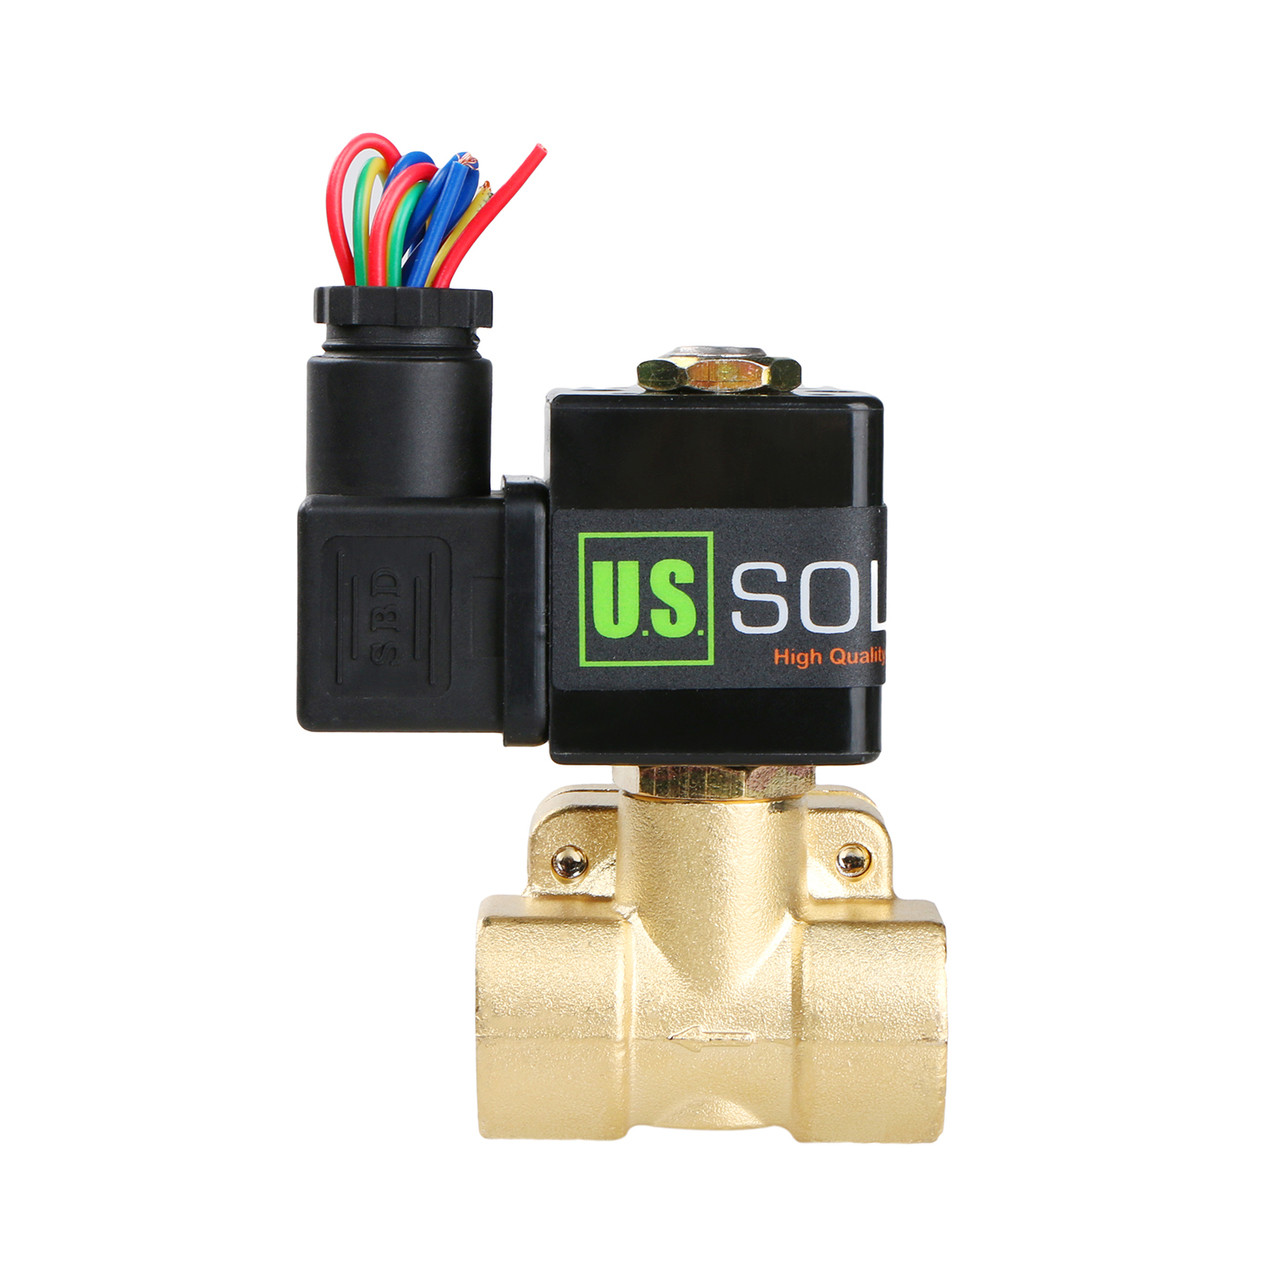 U.S. Solid Electric Solenoid Valve- 1/2" 110V AC Solenoid Valve Brass Body Normally Closed, Pilot Type, VITON SEAL